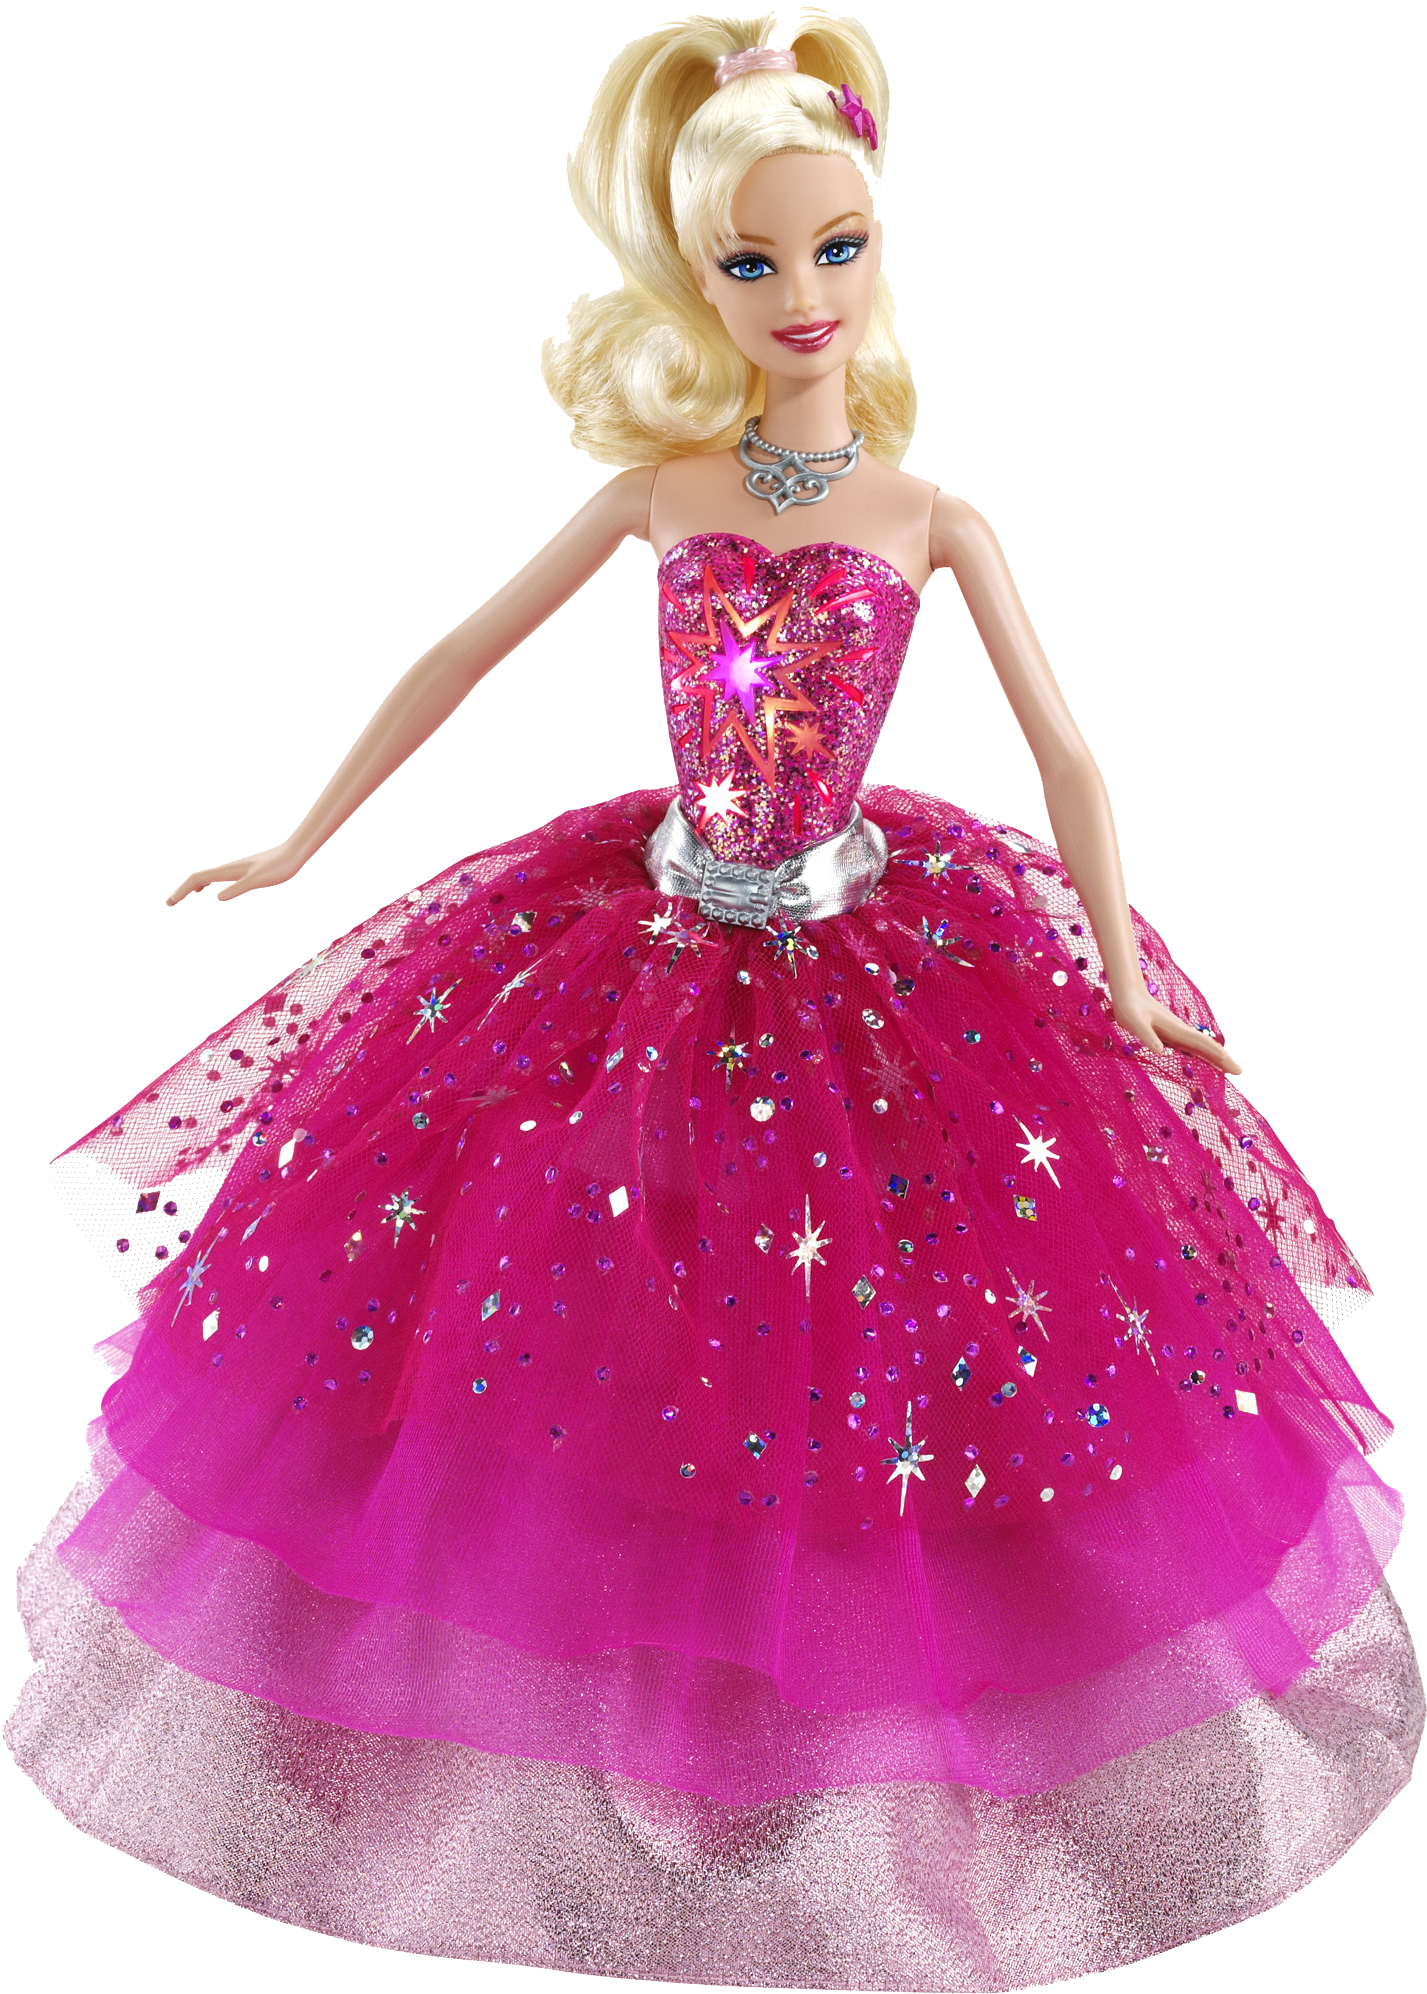 25 Transparent Background Barbie Png Tong Kosong Images